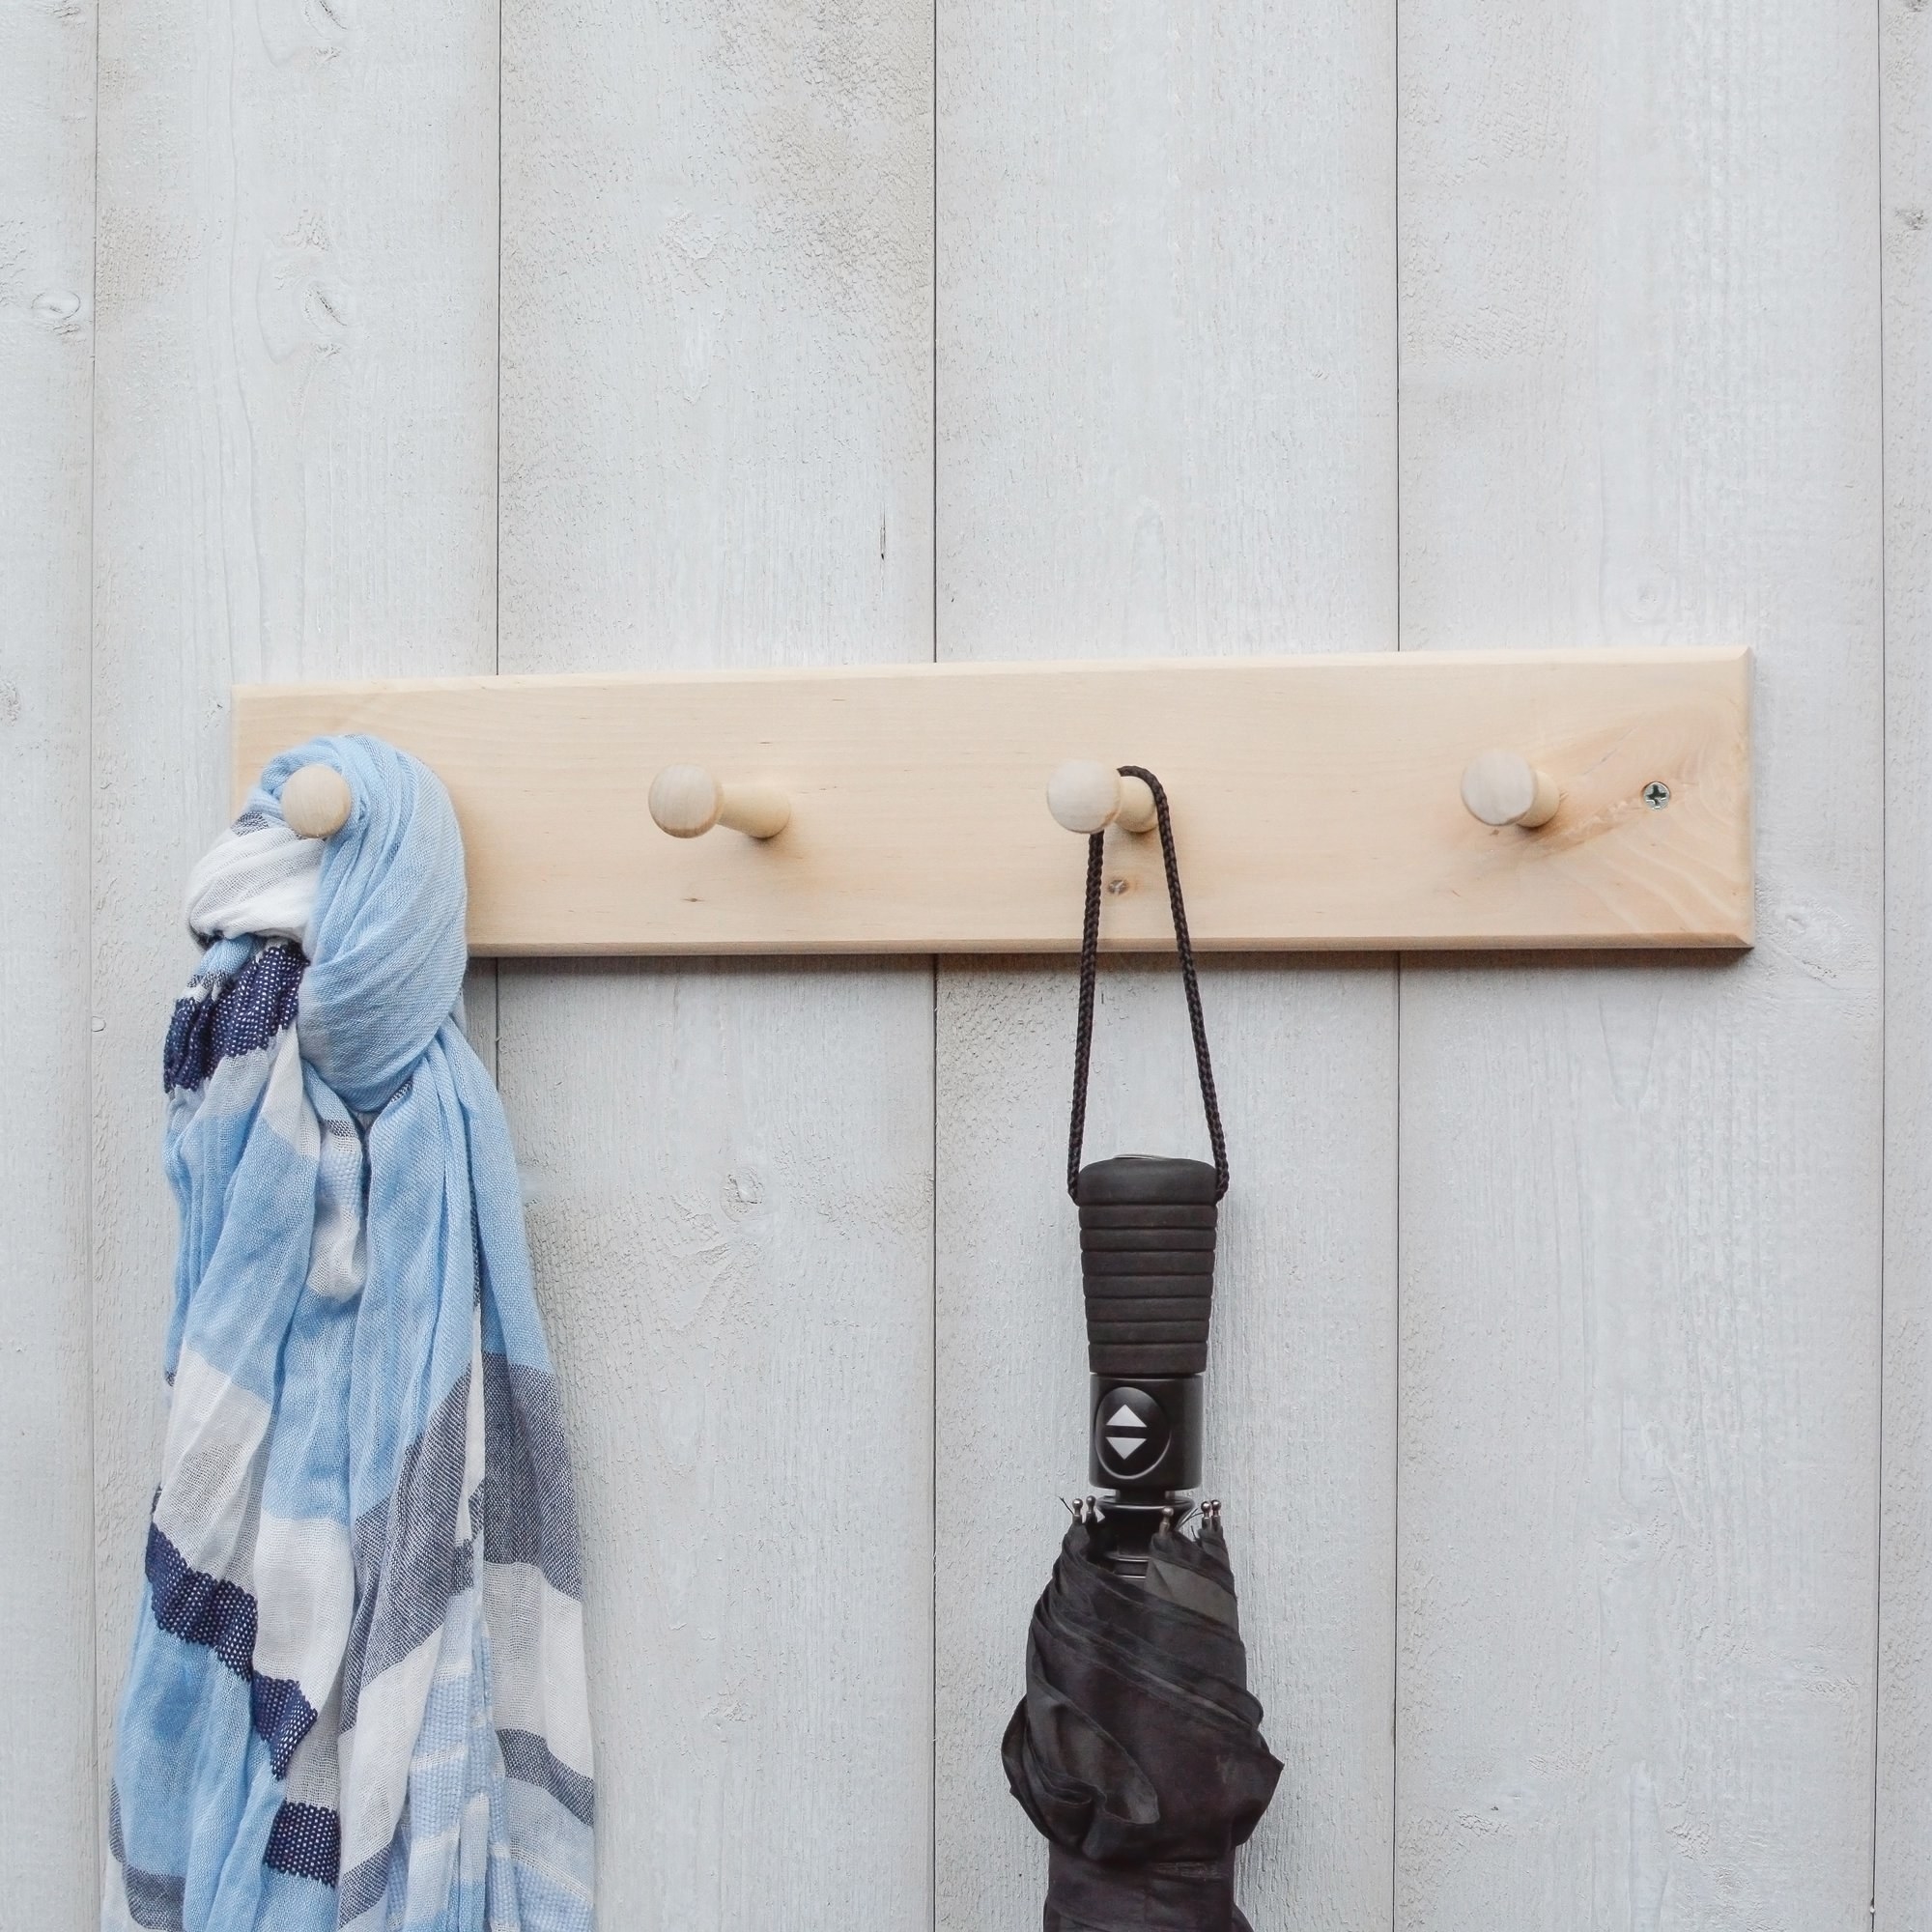 the wooden rack with a scarf and an umbrella